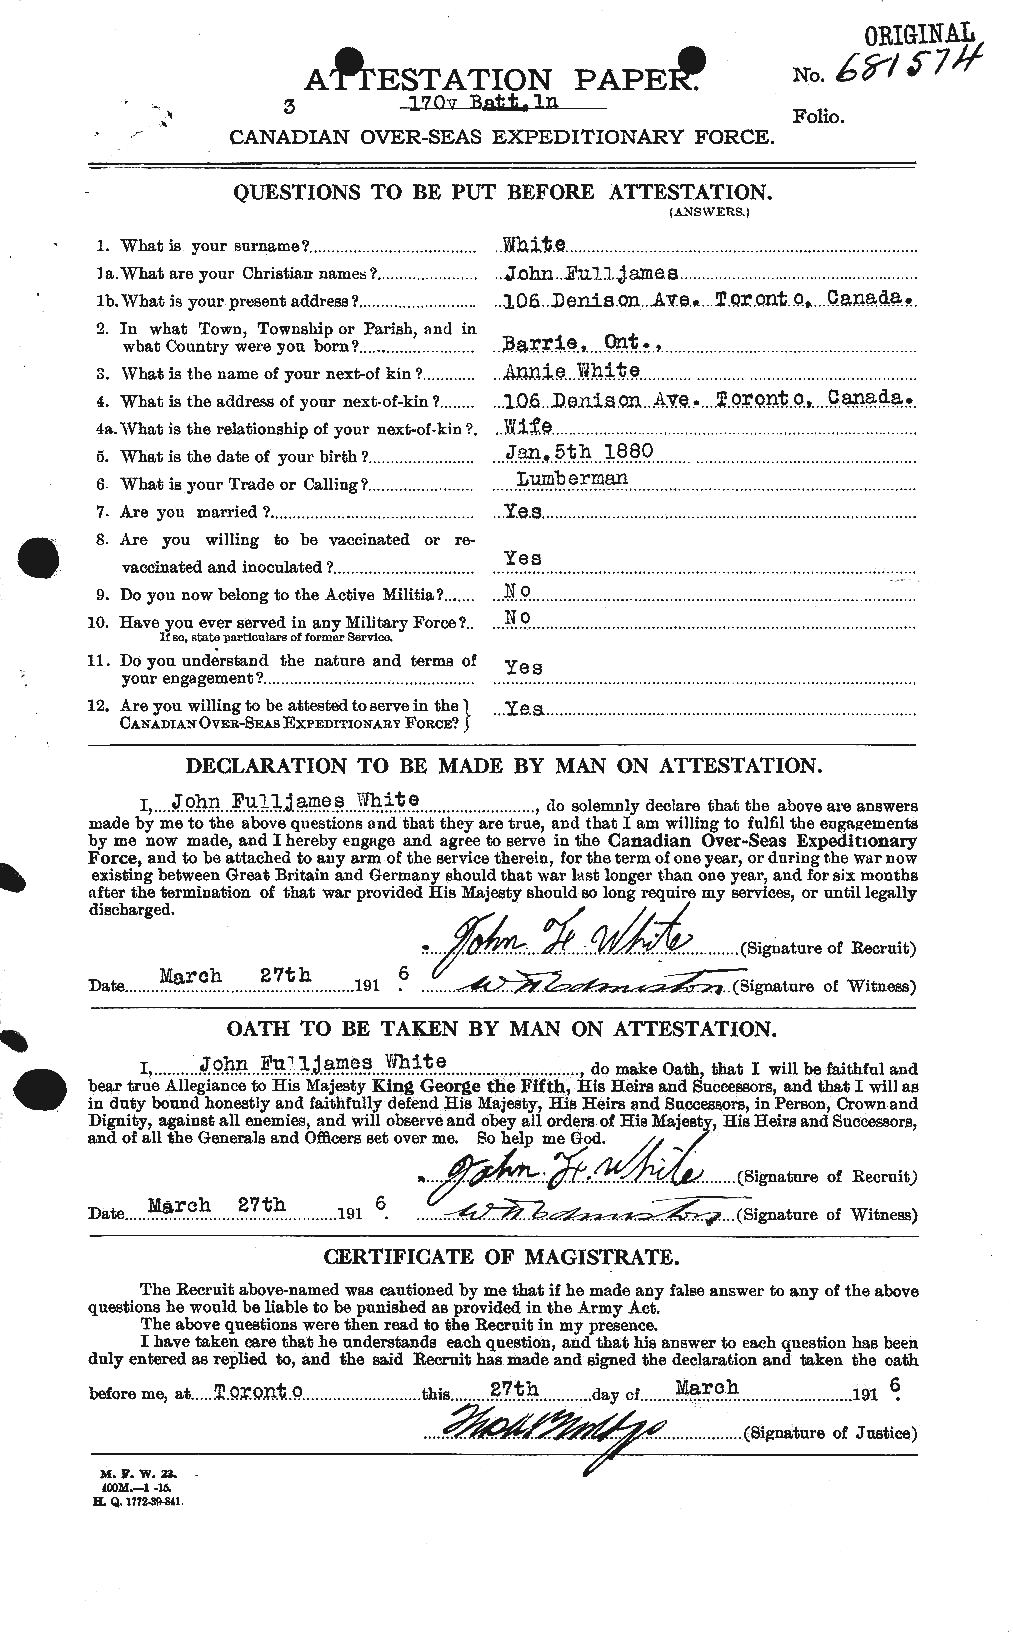 Personnel Records of the First World War - CEF 671562a